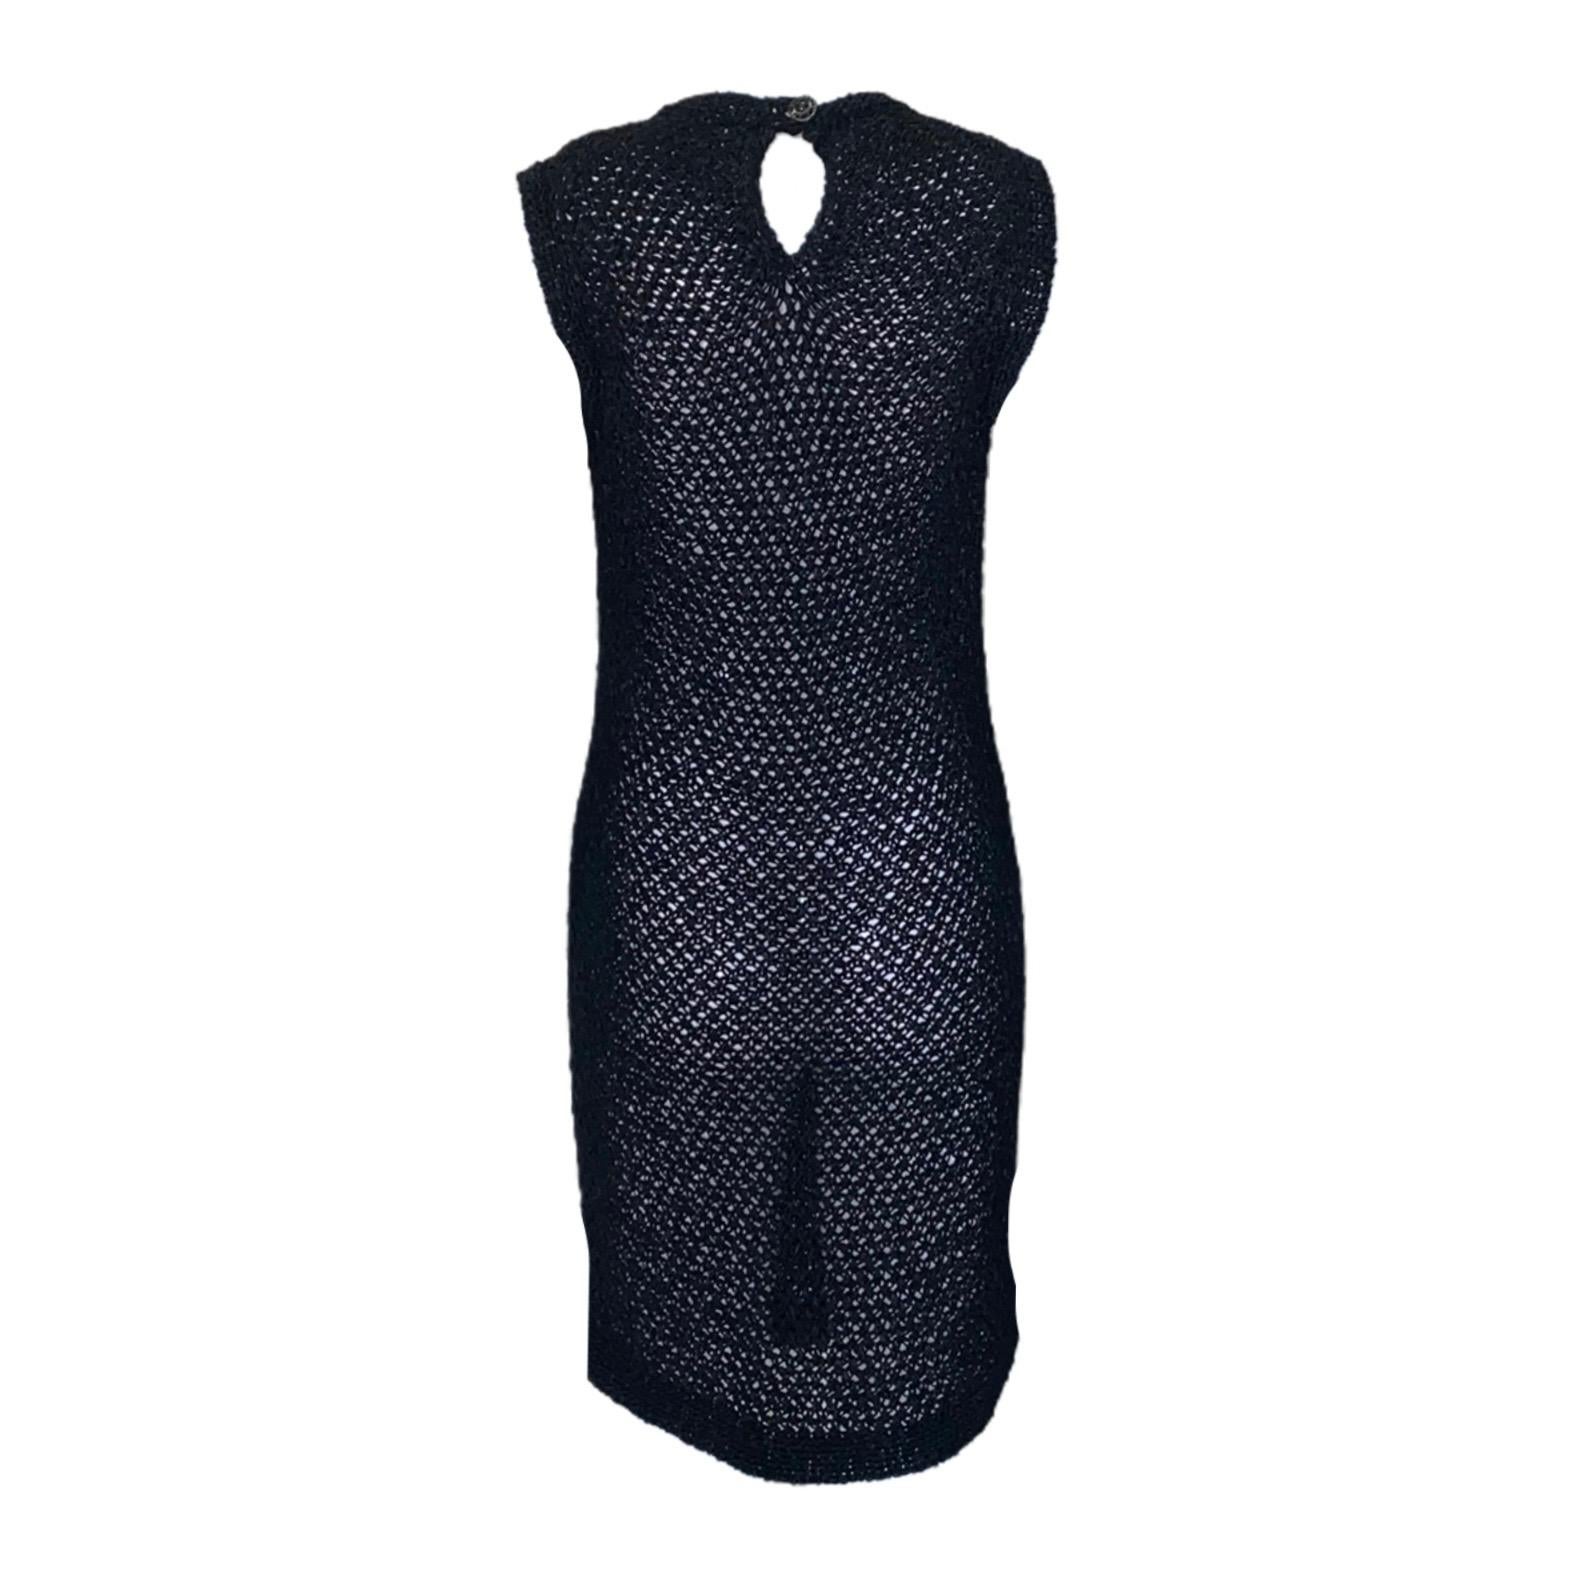 Lovely new interpretation of the timeless Chanel classic little black dress
A true Chanel signature piece that will last for many years
So versatile - dress it up with a slip dress for a formal yet seductive look and pair it with high heels or throw